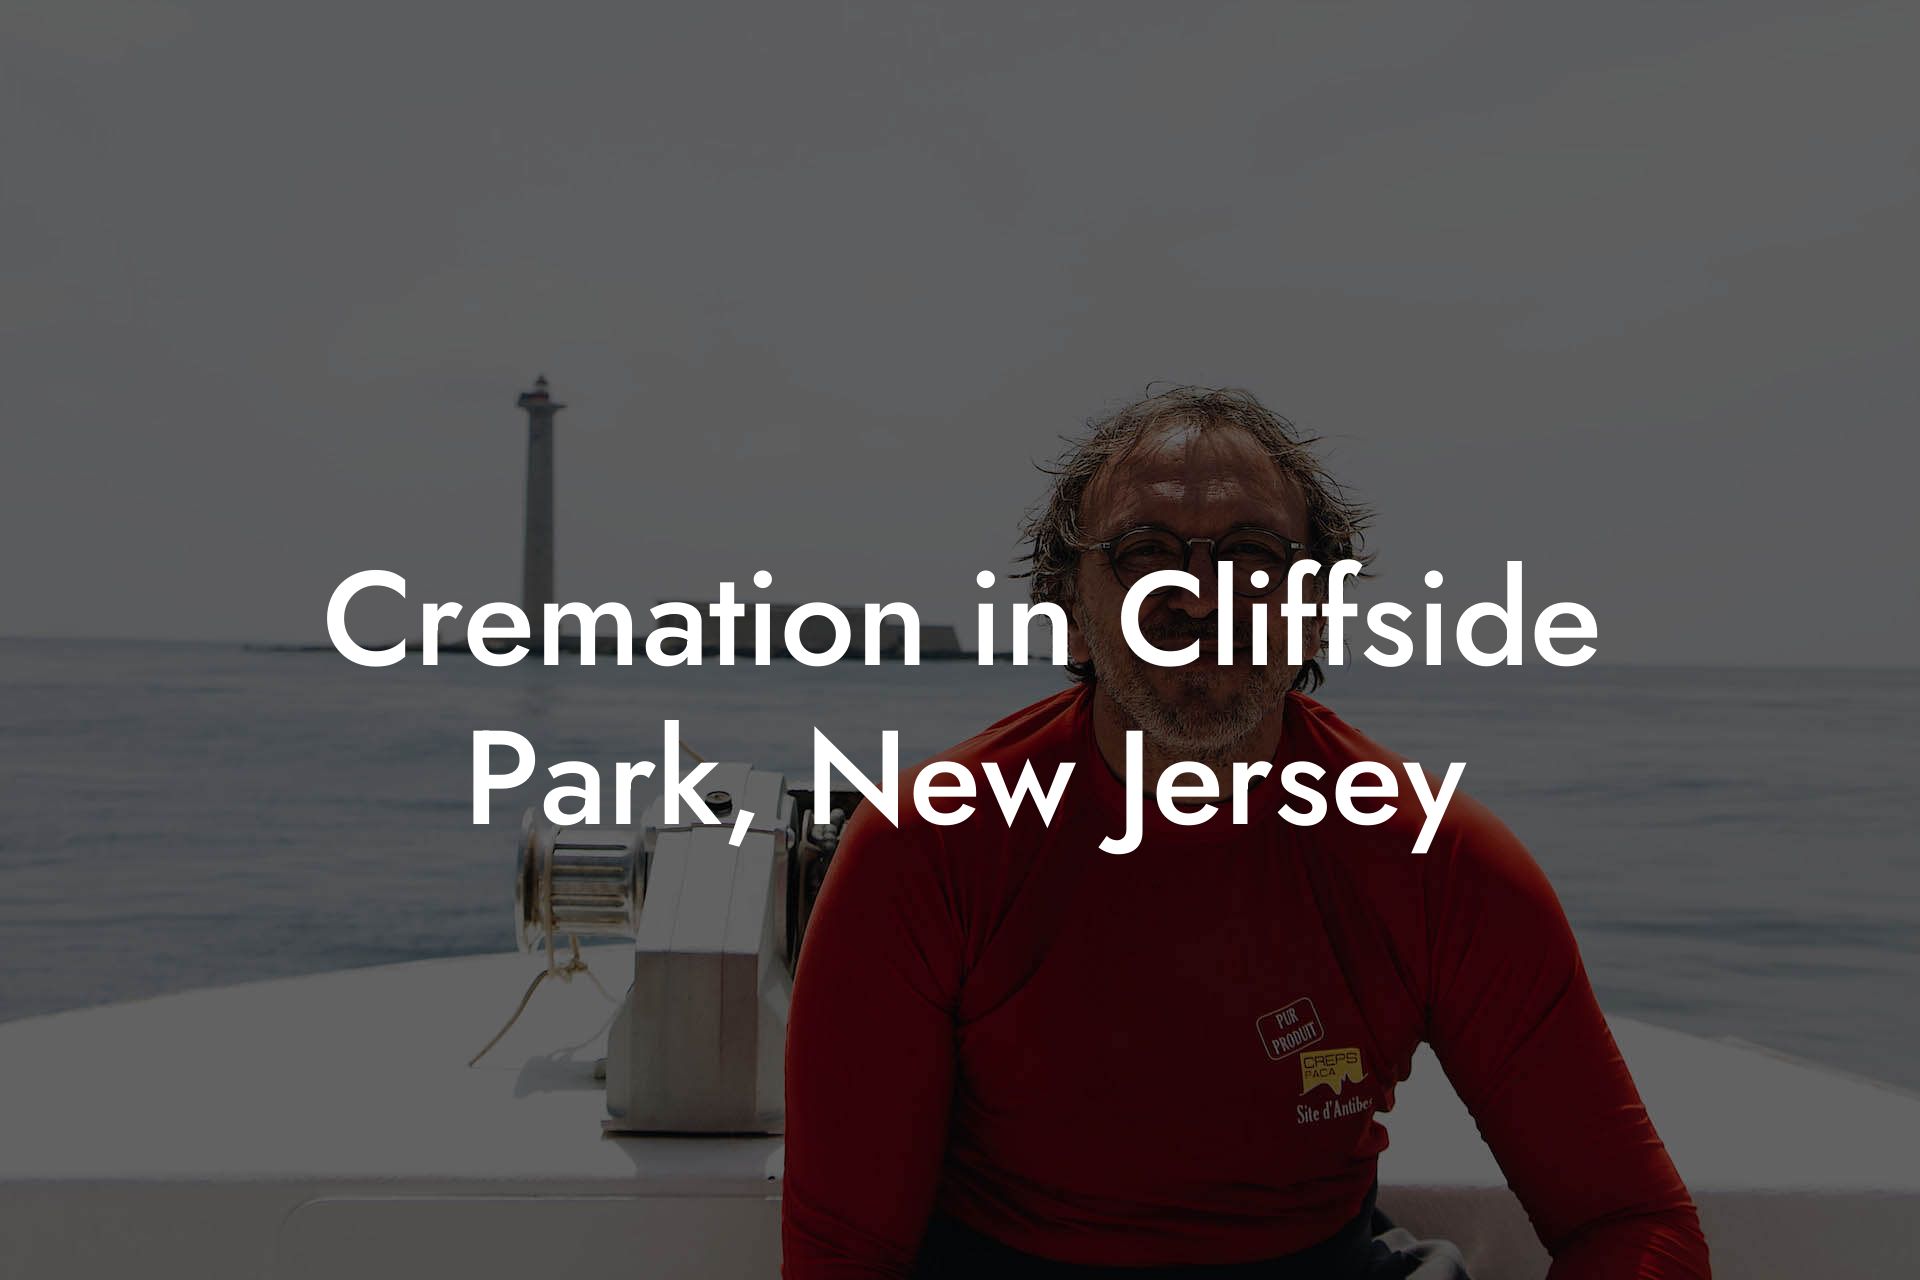 Cremation in Cliffside Park, New Jersey